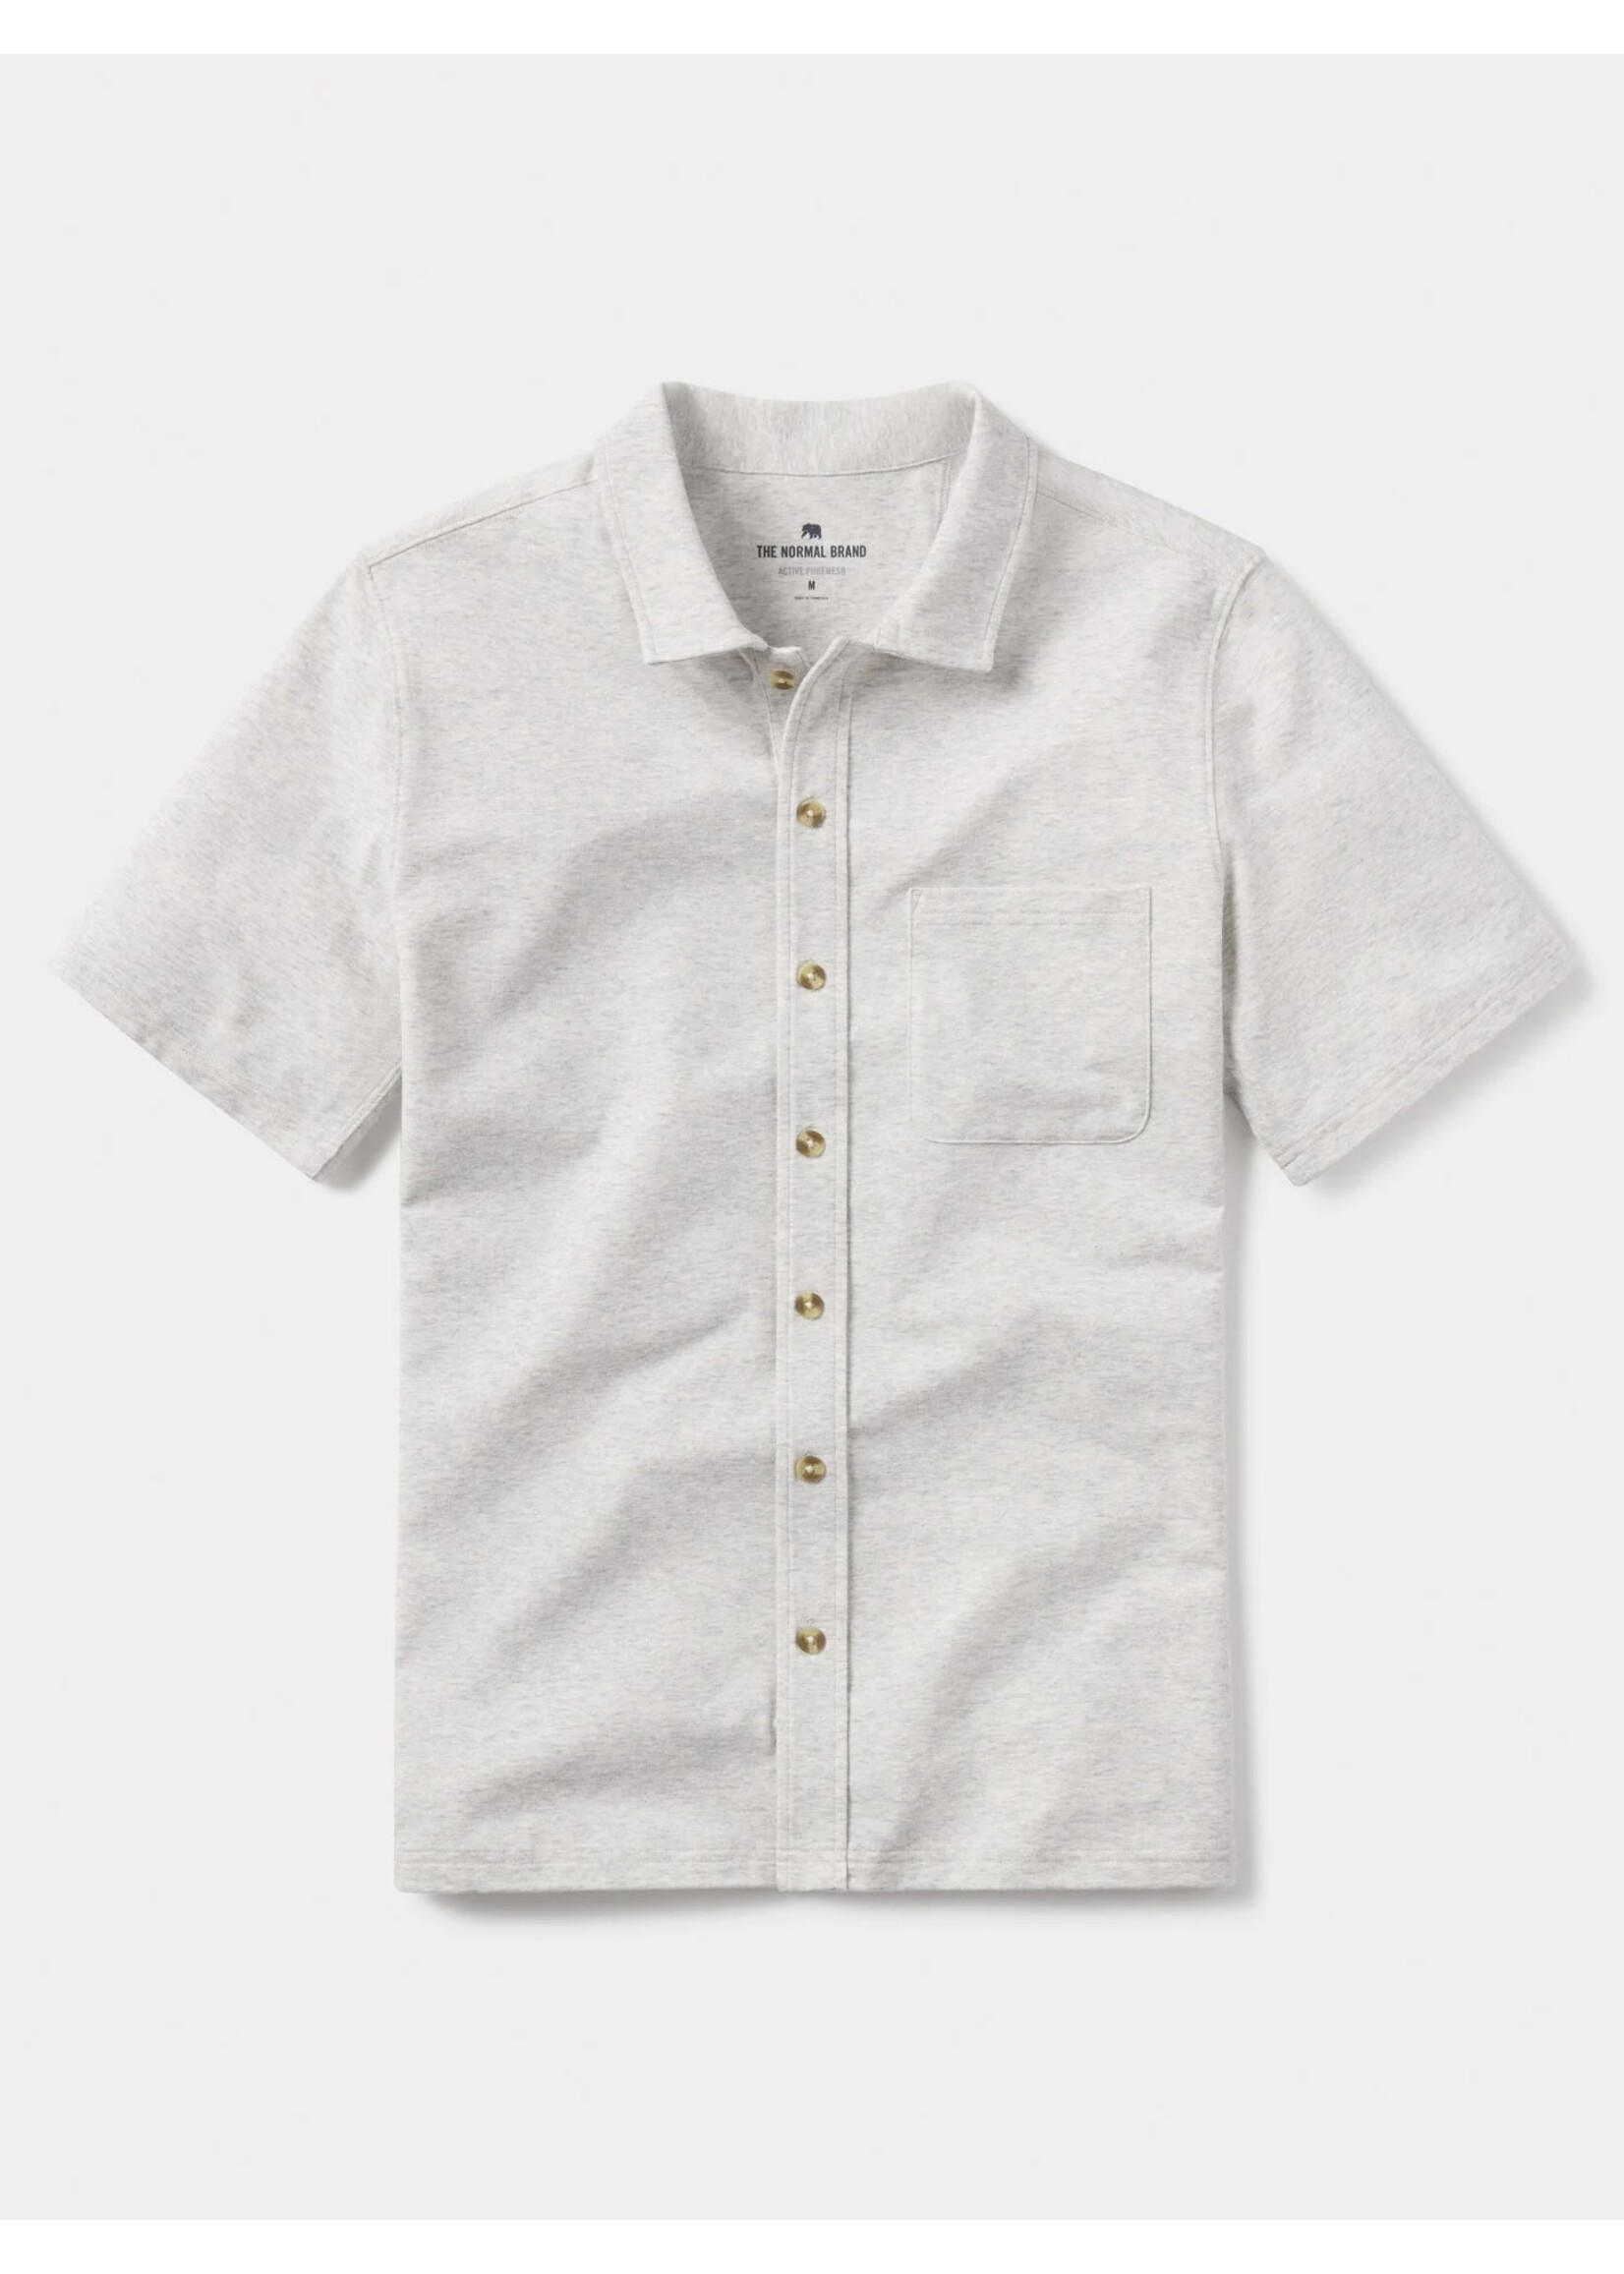 The Normal Brand SS Active Puremeso Weekend Buttondown